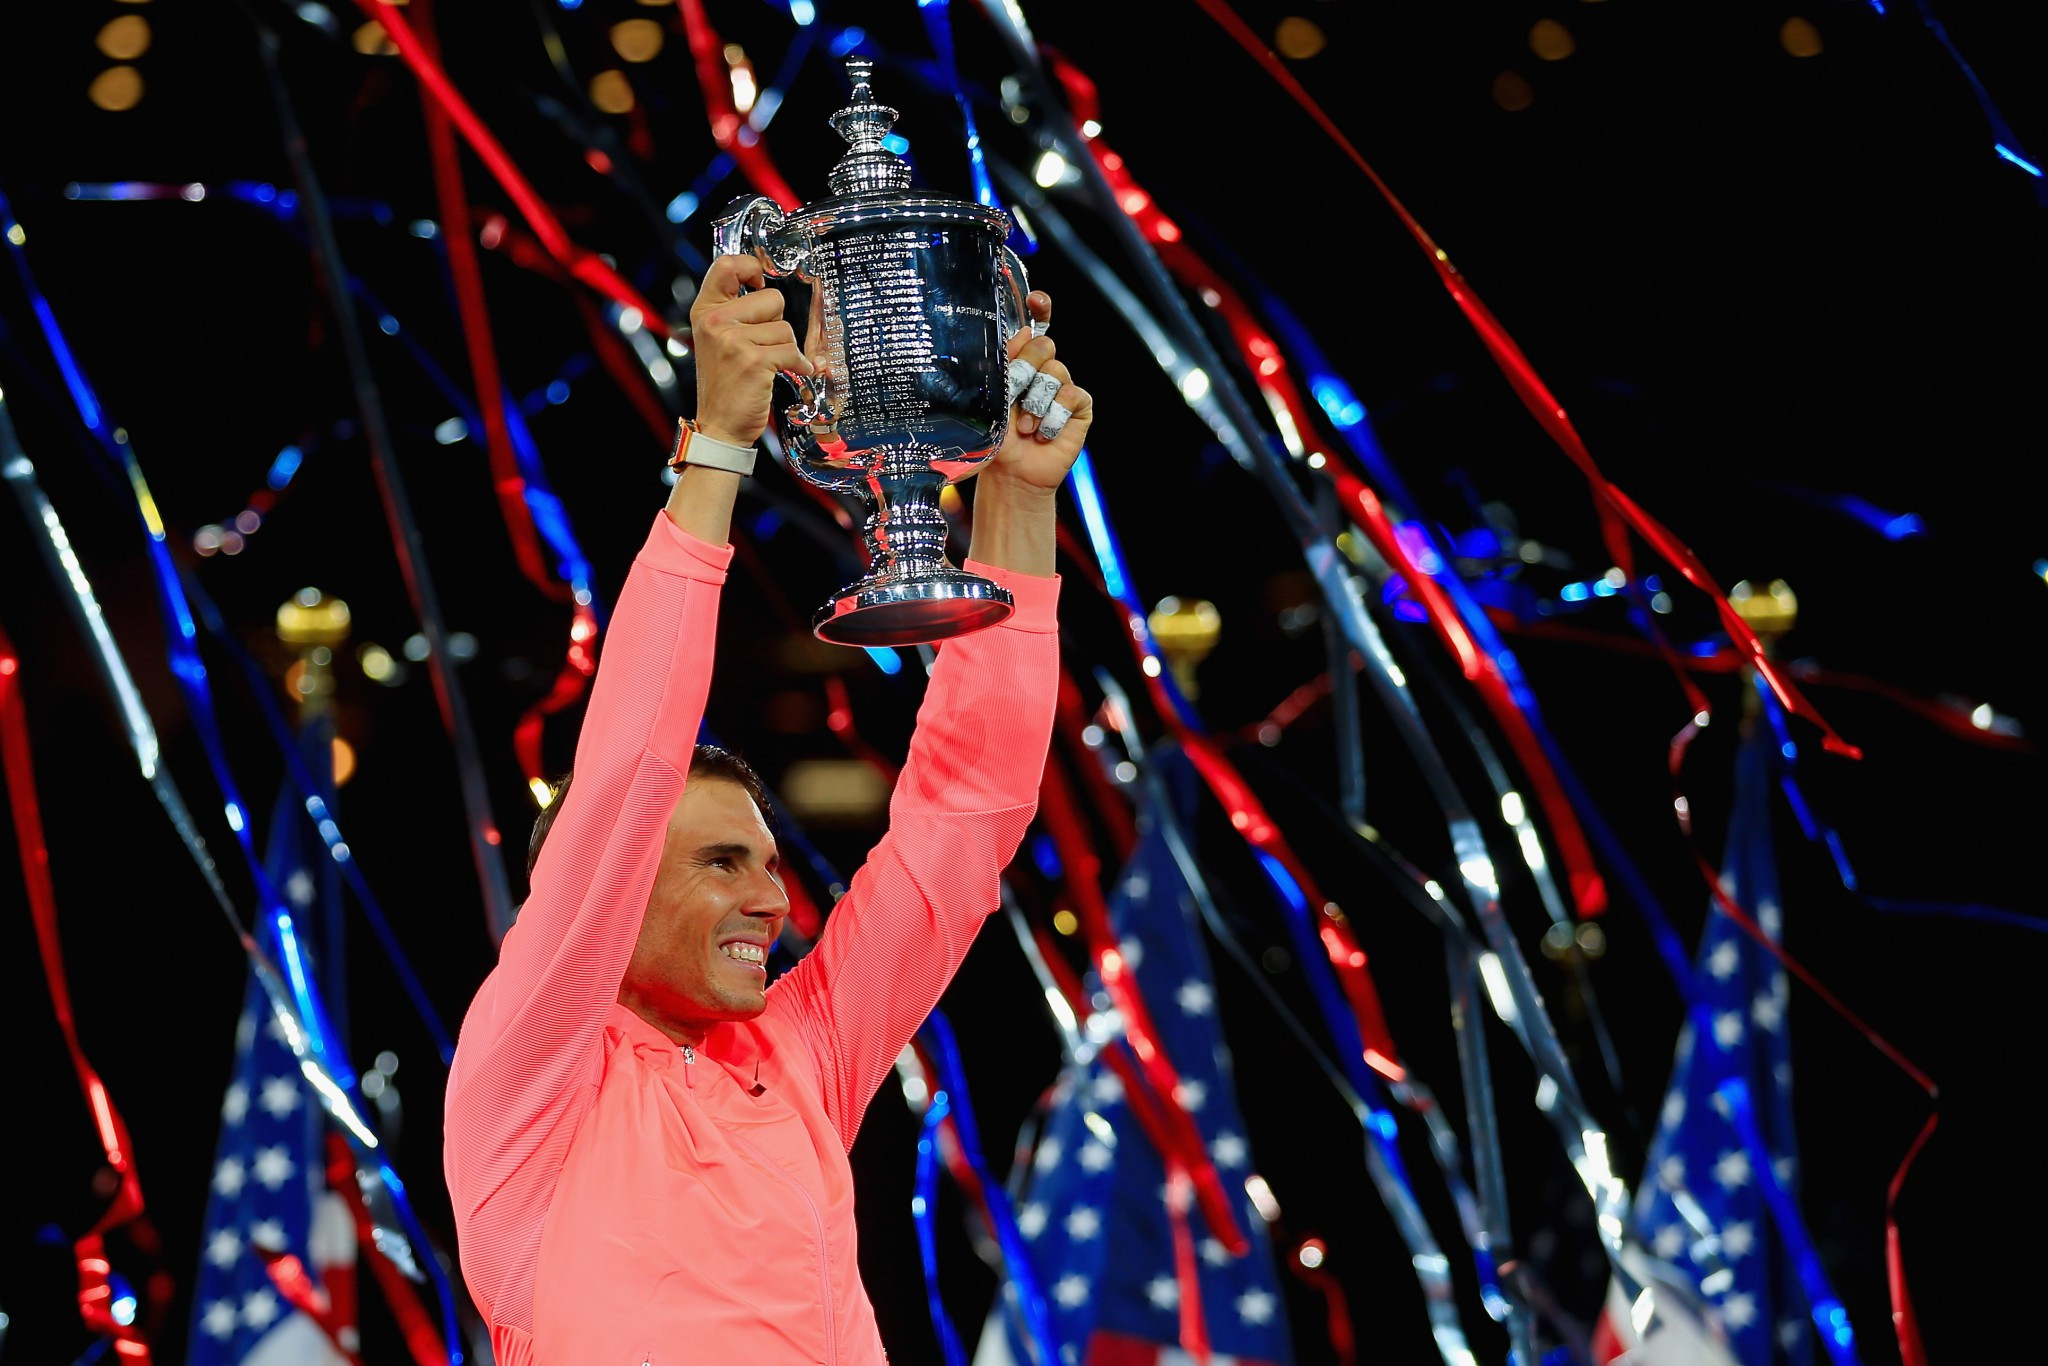 Rafael Nadal has won the men's singles final at the US Open ©Getty Images